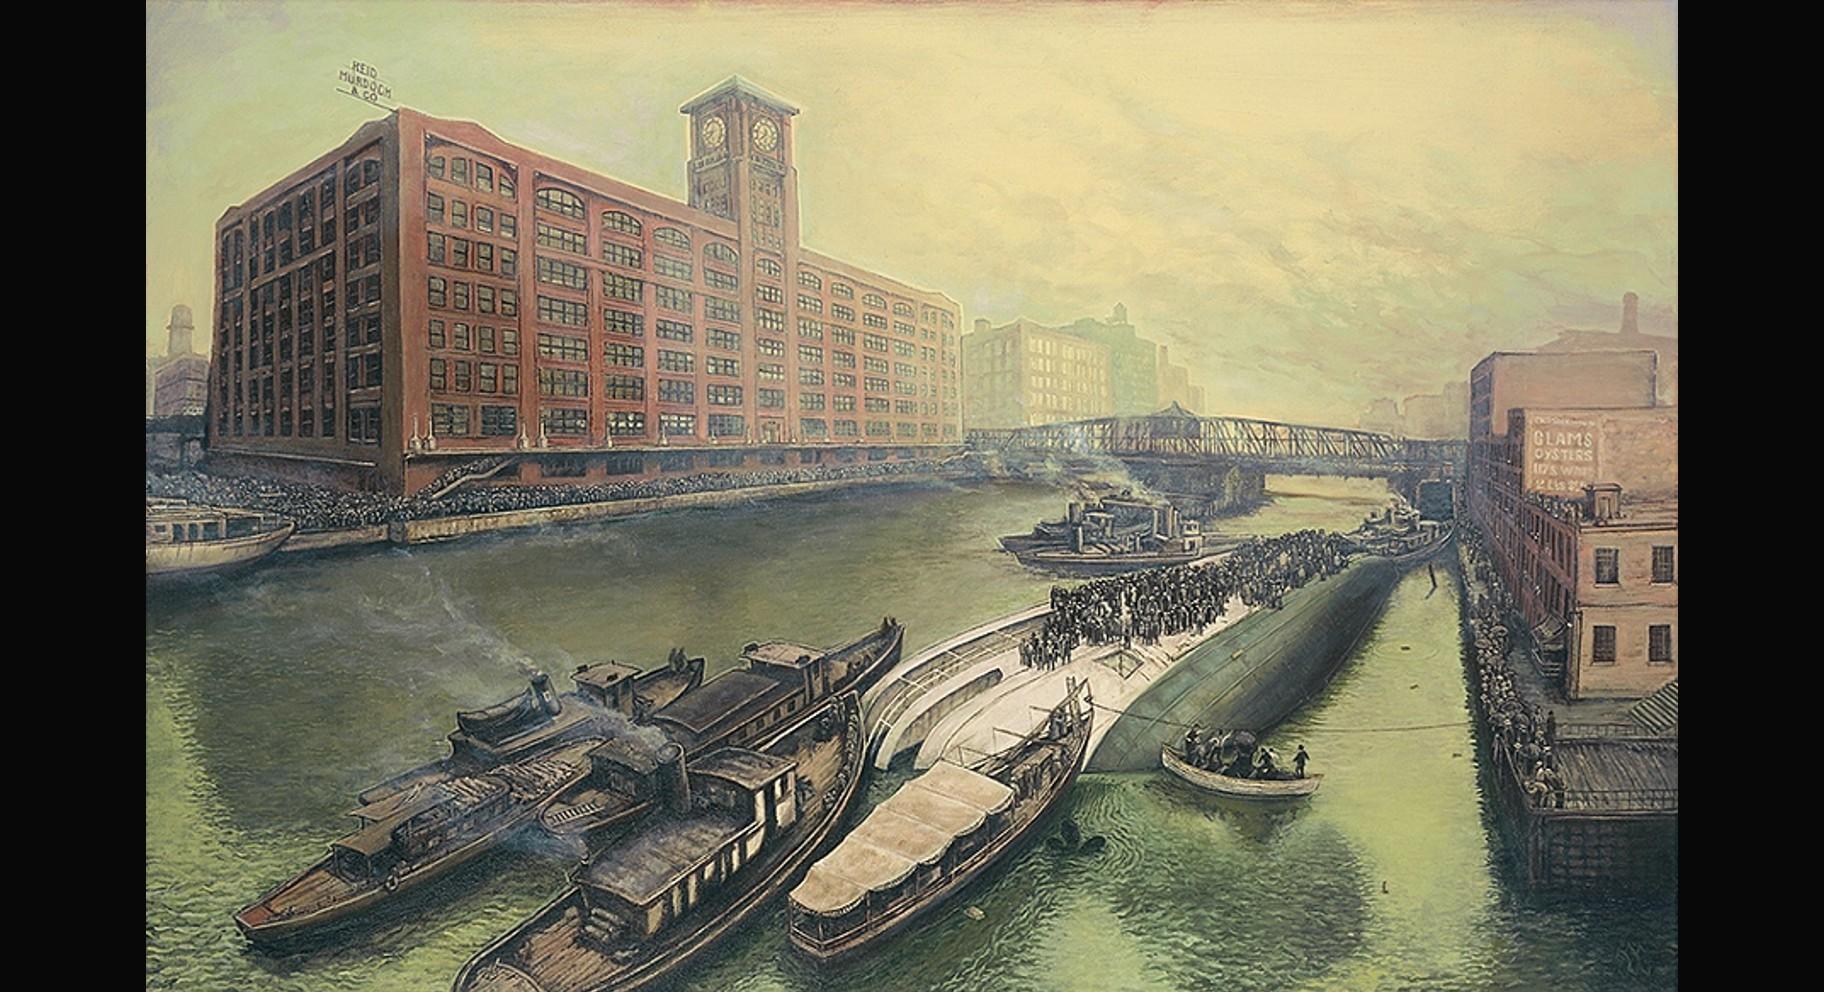 A painting of the 1903 Eastland Disaster in the Chicago River. (Credit: Eric Edward Esper)